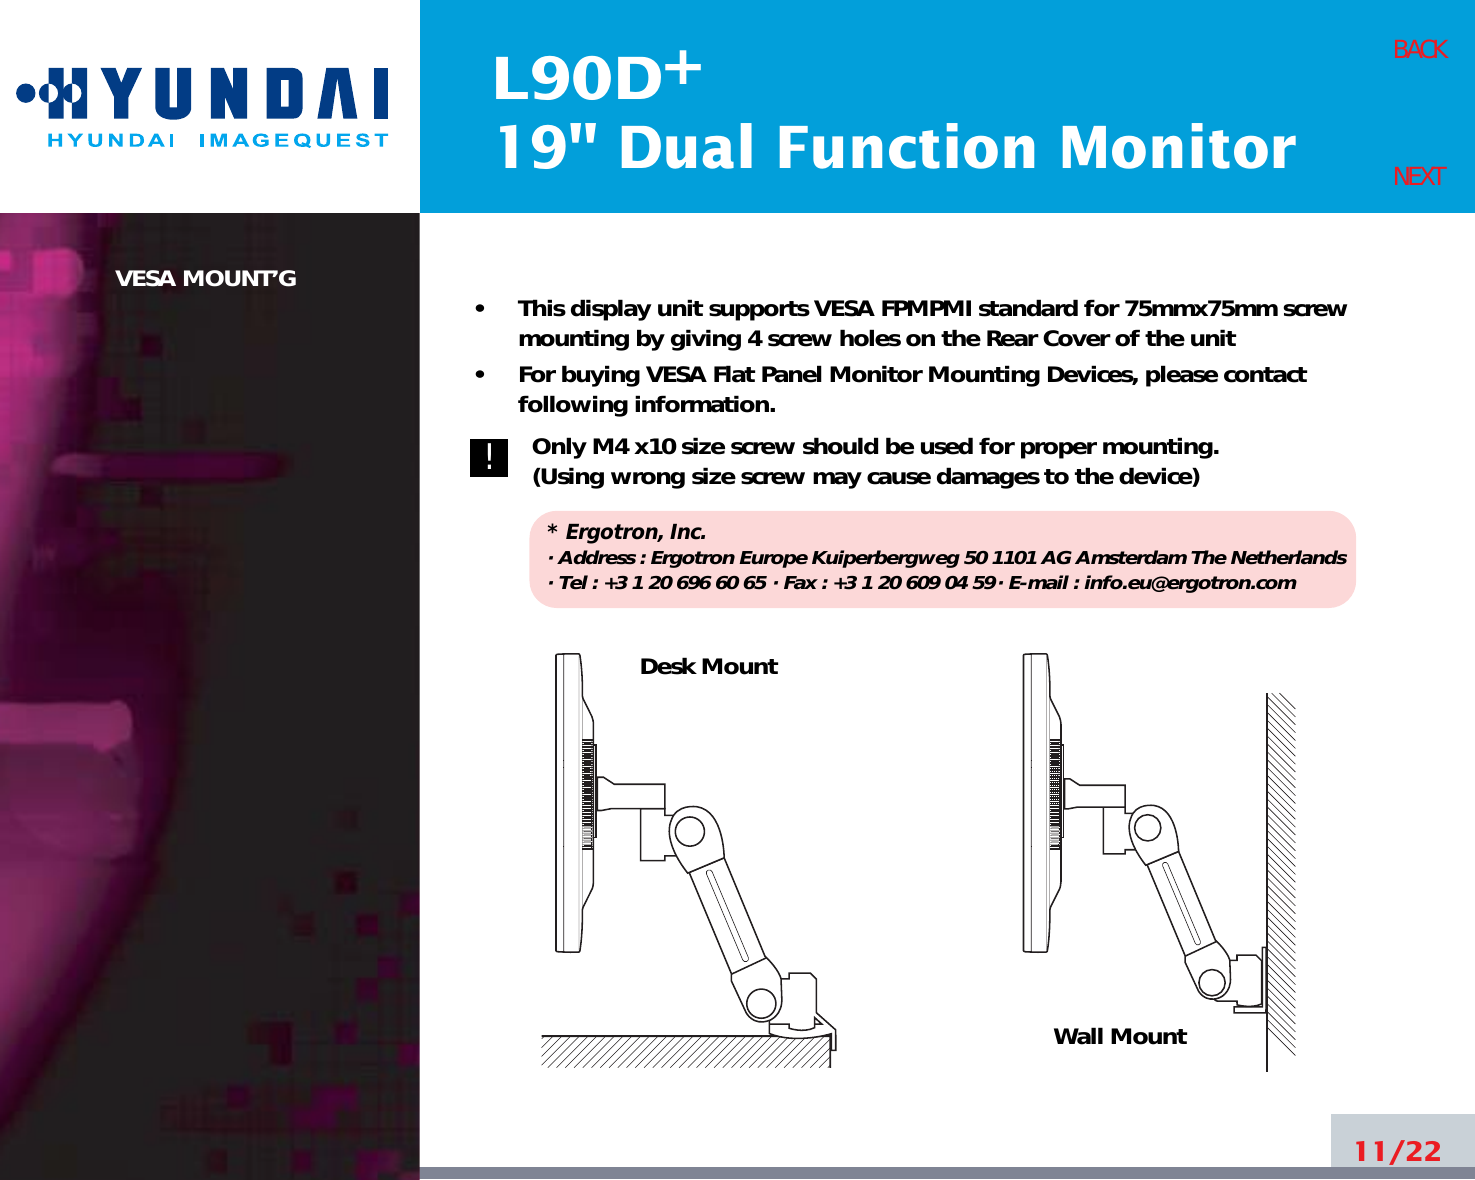 L90D19&quot; Dual Function Monitor+VESA MOUNT’G •     This display unit supports VESA FPMPMI standard for 75mmx75mm screwmounting by giving 4 screw holes on the Rear Cover of the unit•     For buying VESA Flat Panel Monitor Mounting Devices, please contactfollowing information.Only M4 x10 size screw should be used for proper mounting.(Using wrong size screw may cause damages to the device)* Ergotron, Inc.· Address : Ergotron Europe Kuiperbergweg 50 1101 AG Amsterdam The Netherlands· Tel : +3 1 20 696 60 65 · Fax : +3 1 20 609 04 59· E-mail : info.eu@ergotron.com11/22BACKNEXTDesk MountWall Mount!